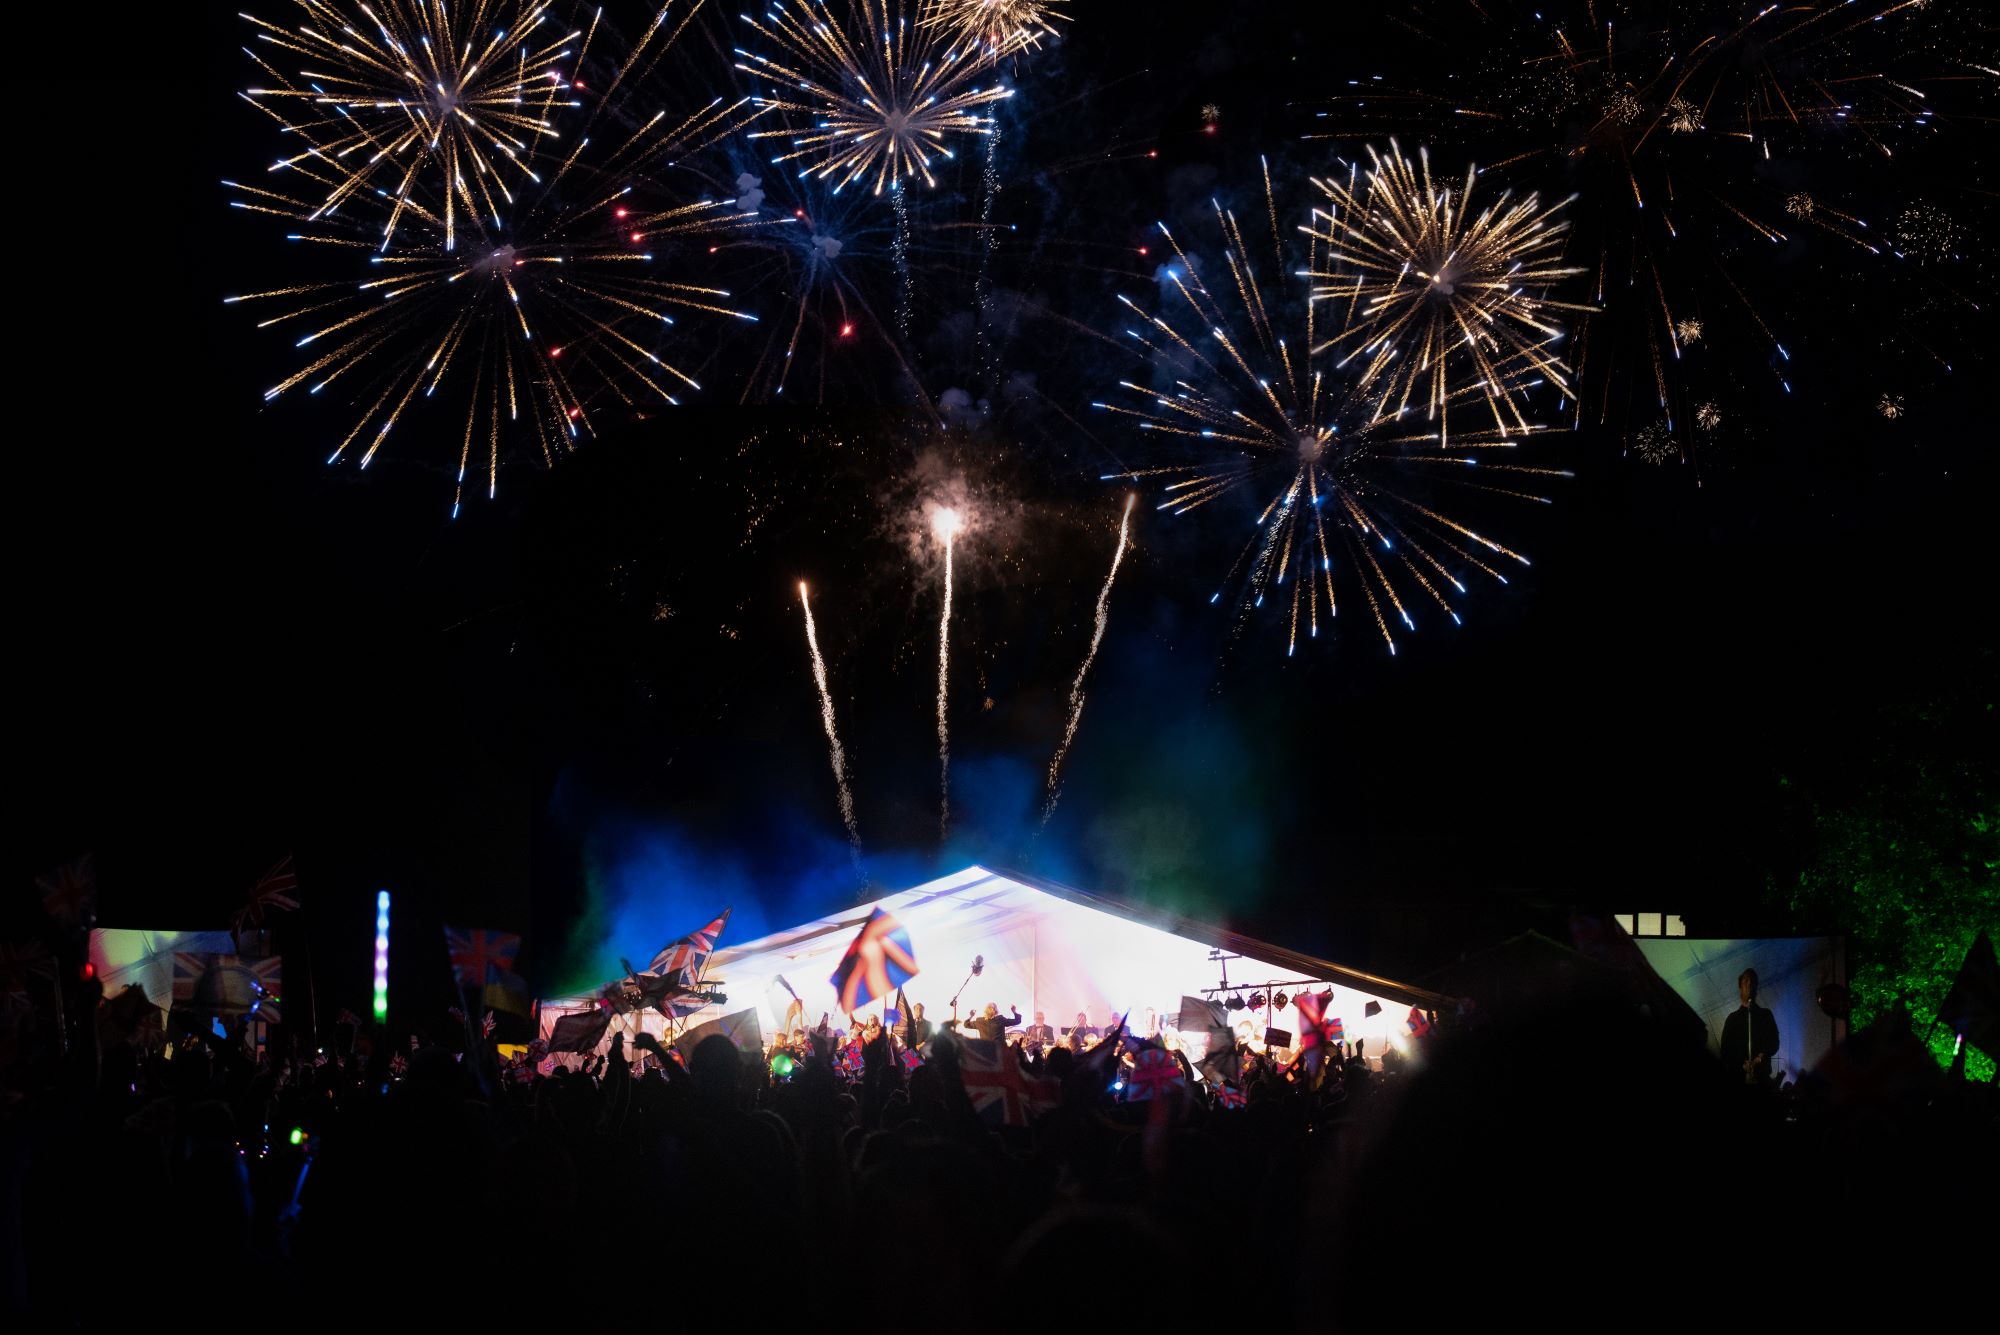 A photo of the Proms concert fireworks.